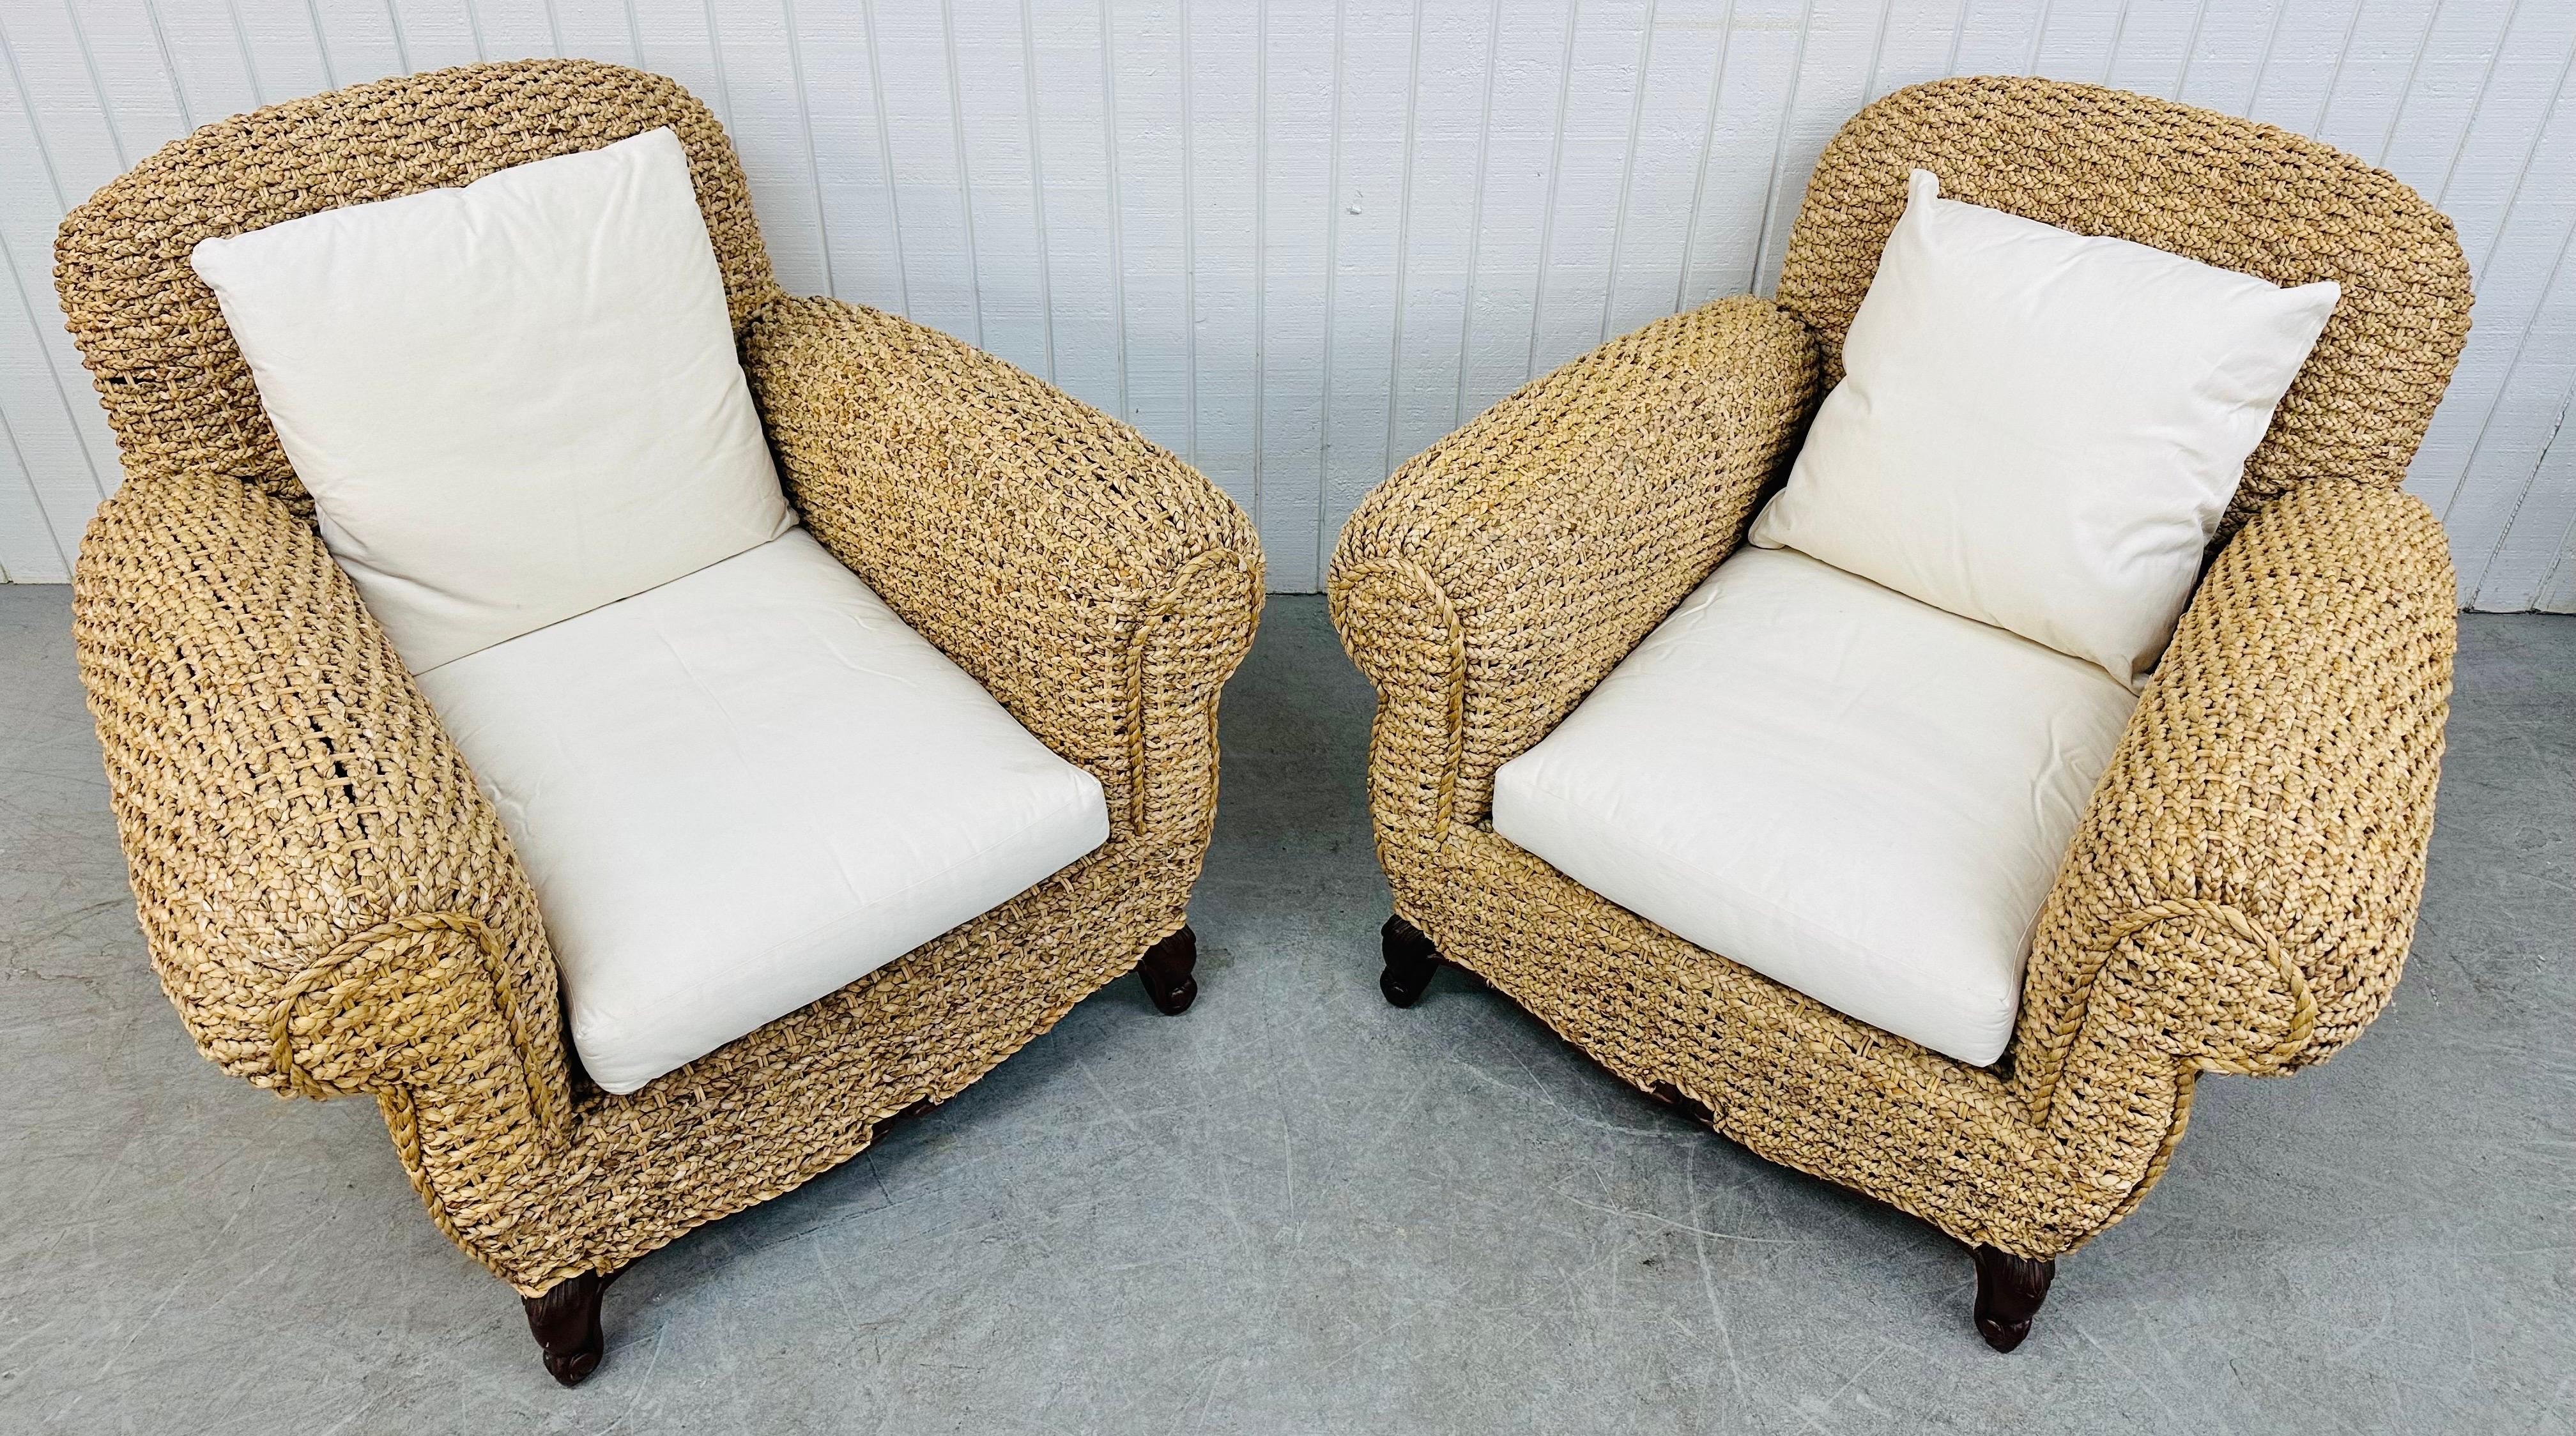 American Vintage Ralph Lauren French Sisal Style Arm Chairs - Set of 2